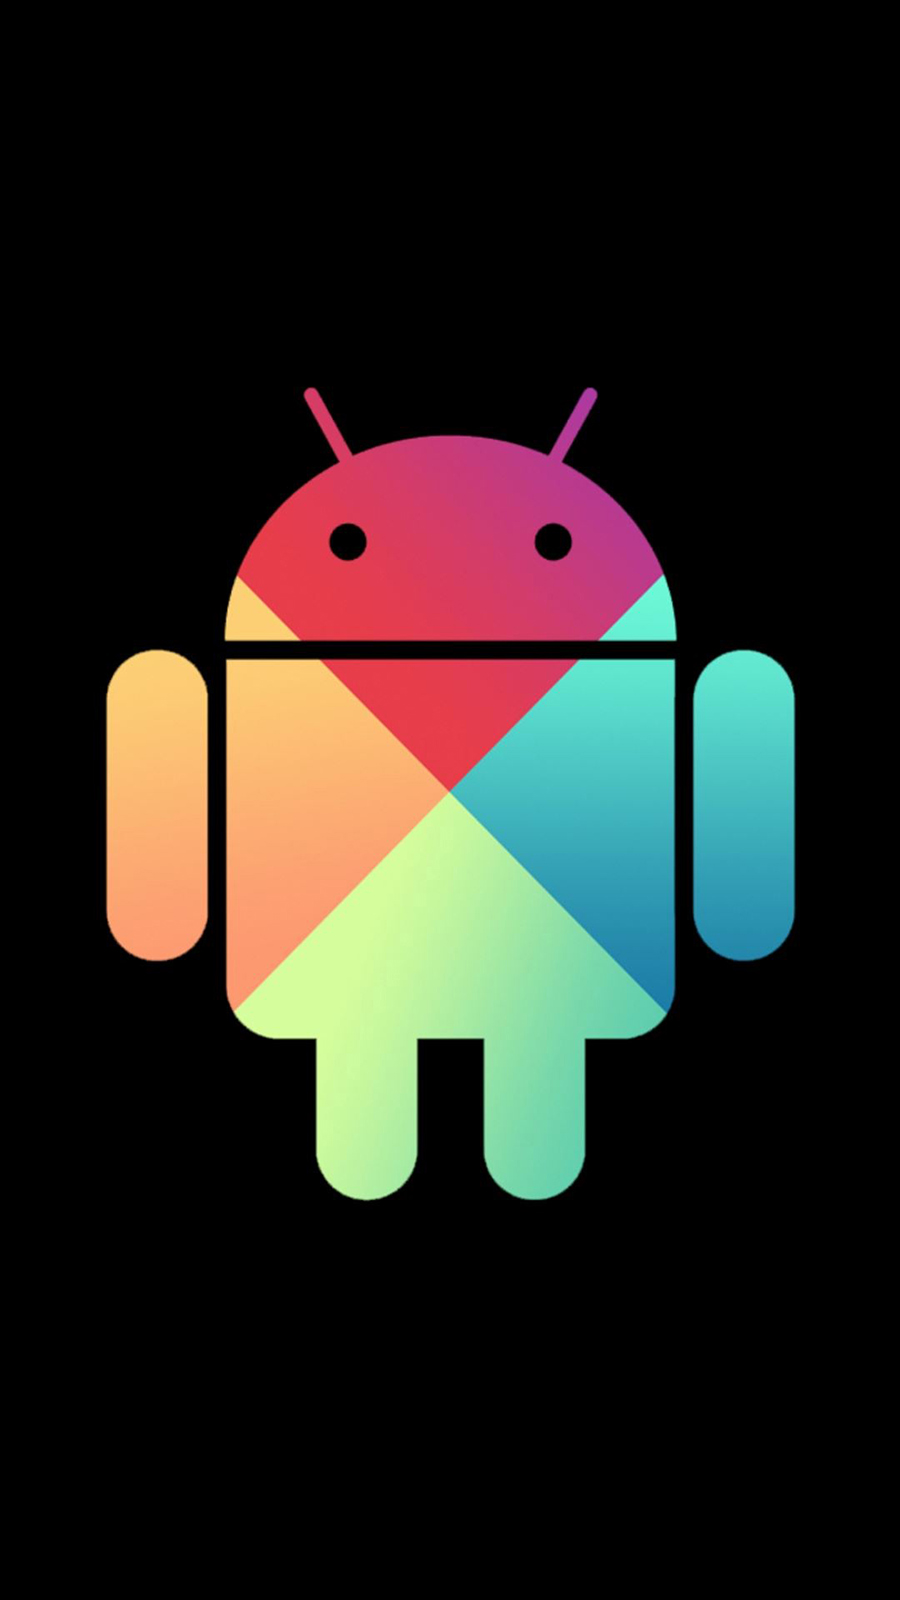 Google Nexus Android Logo Colors Android Wallpaper